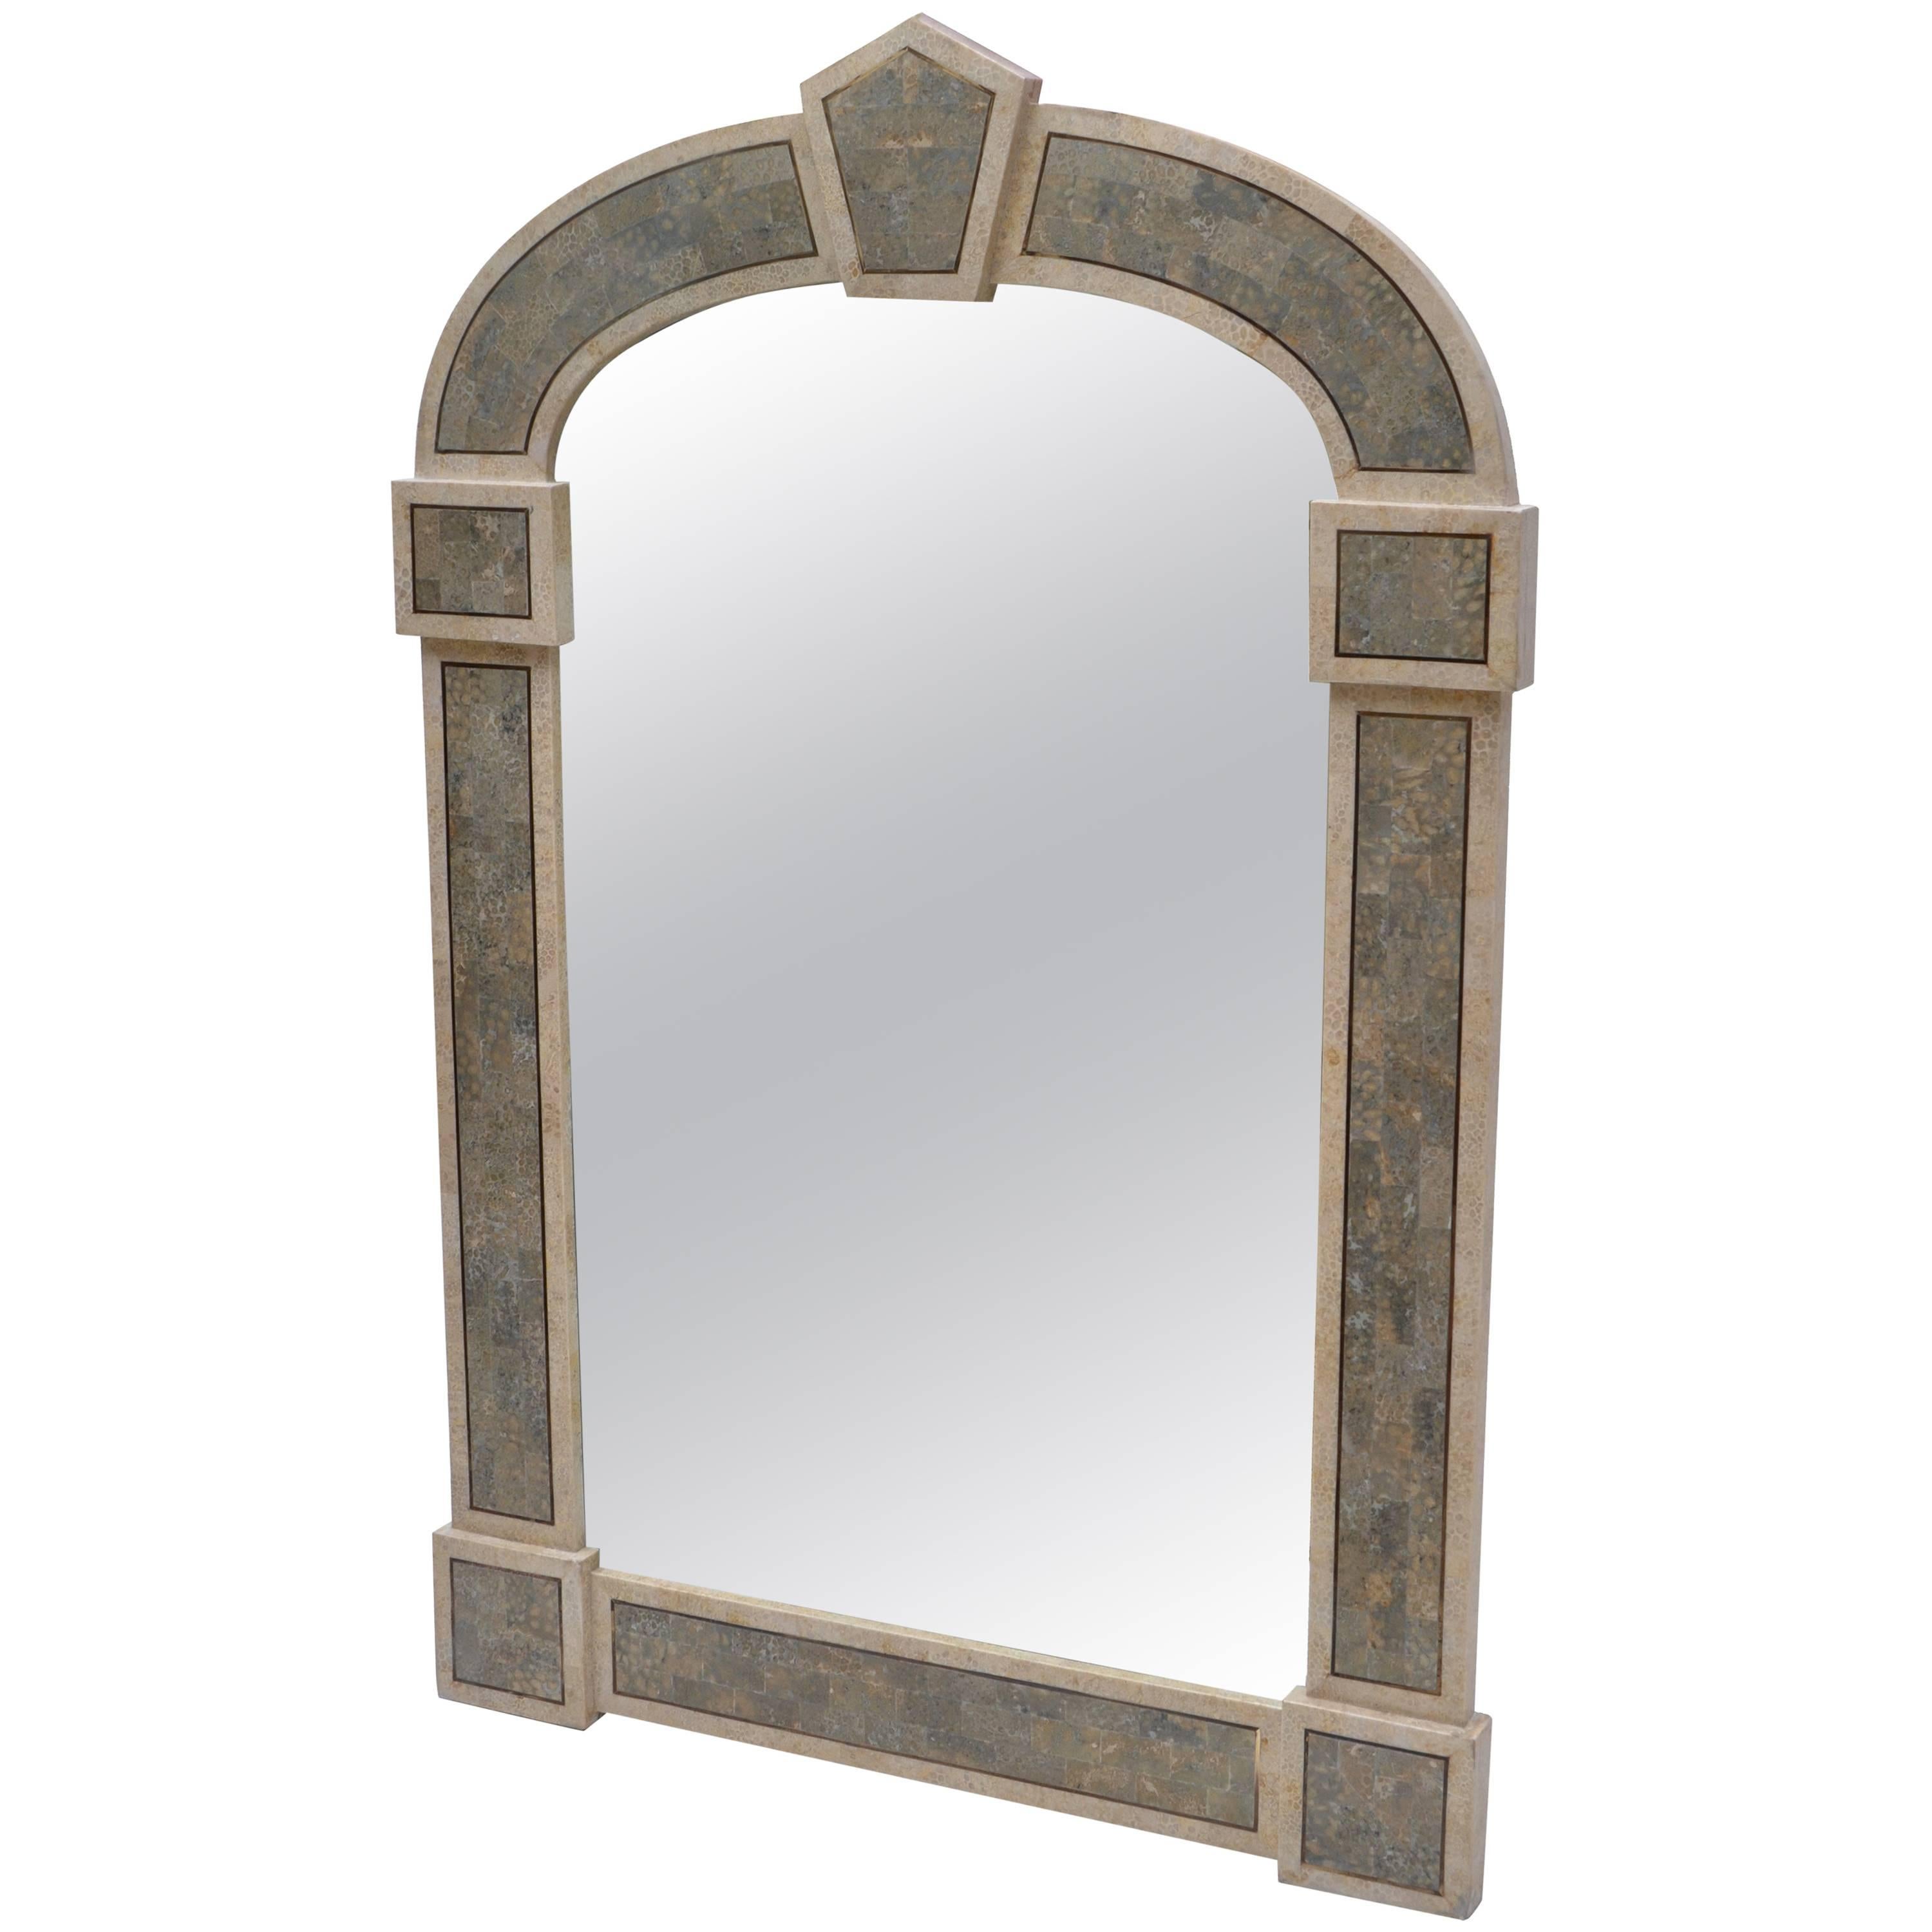 Tessellated Stone over Wood Gothic Shaped Wall Mirror